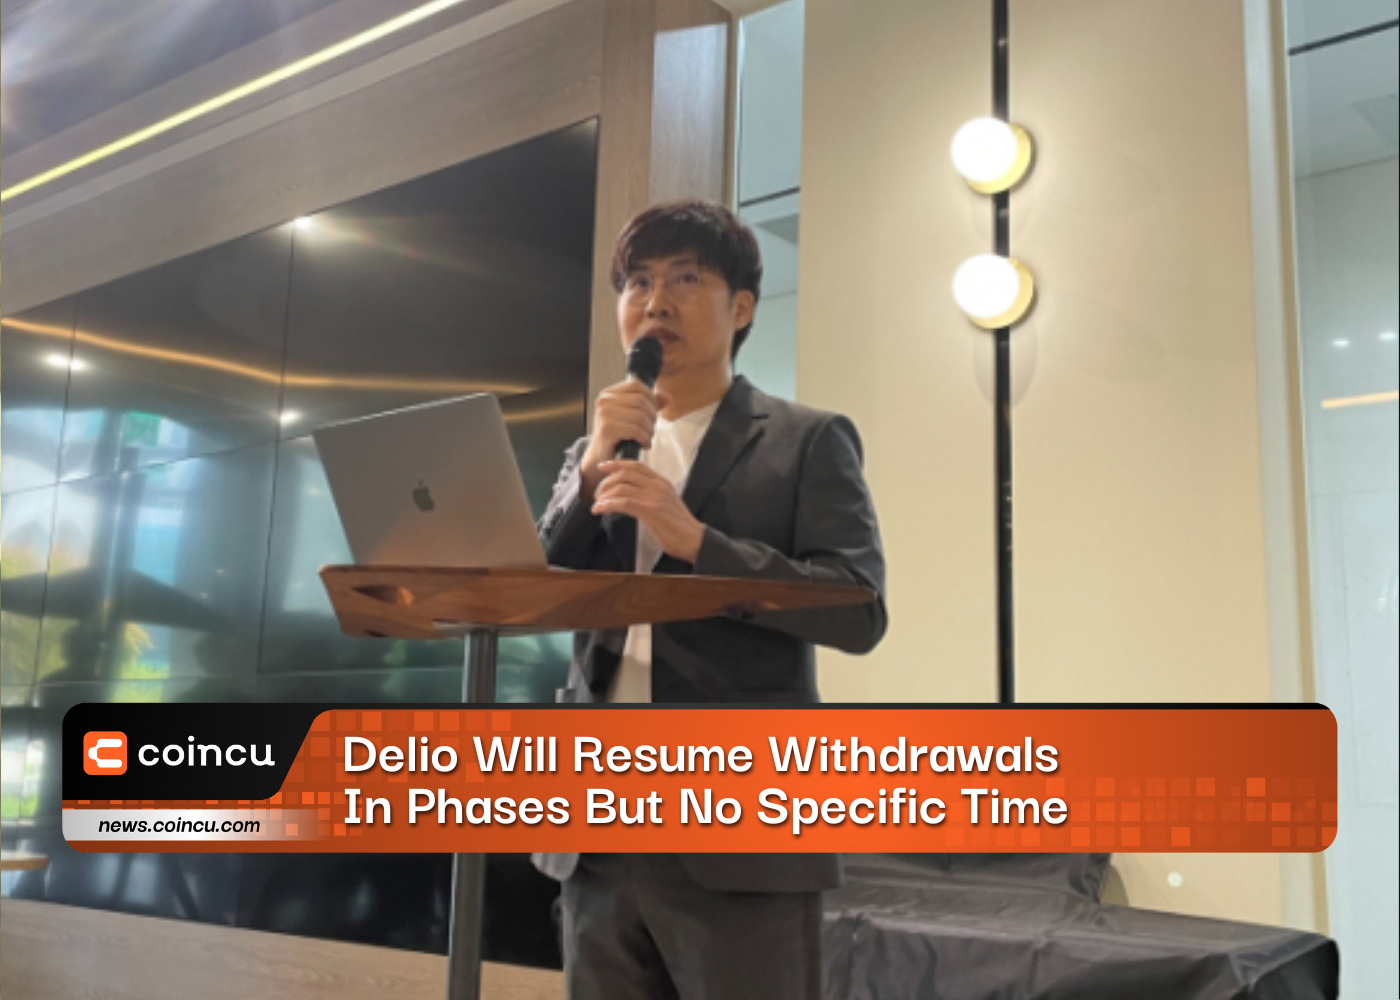 Delio Will Resume Withdrawals In Phases But No Specific Time